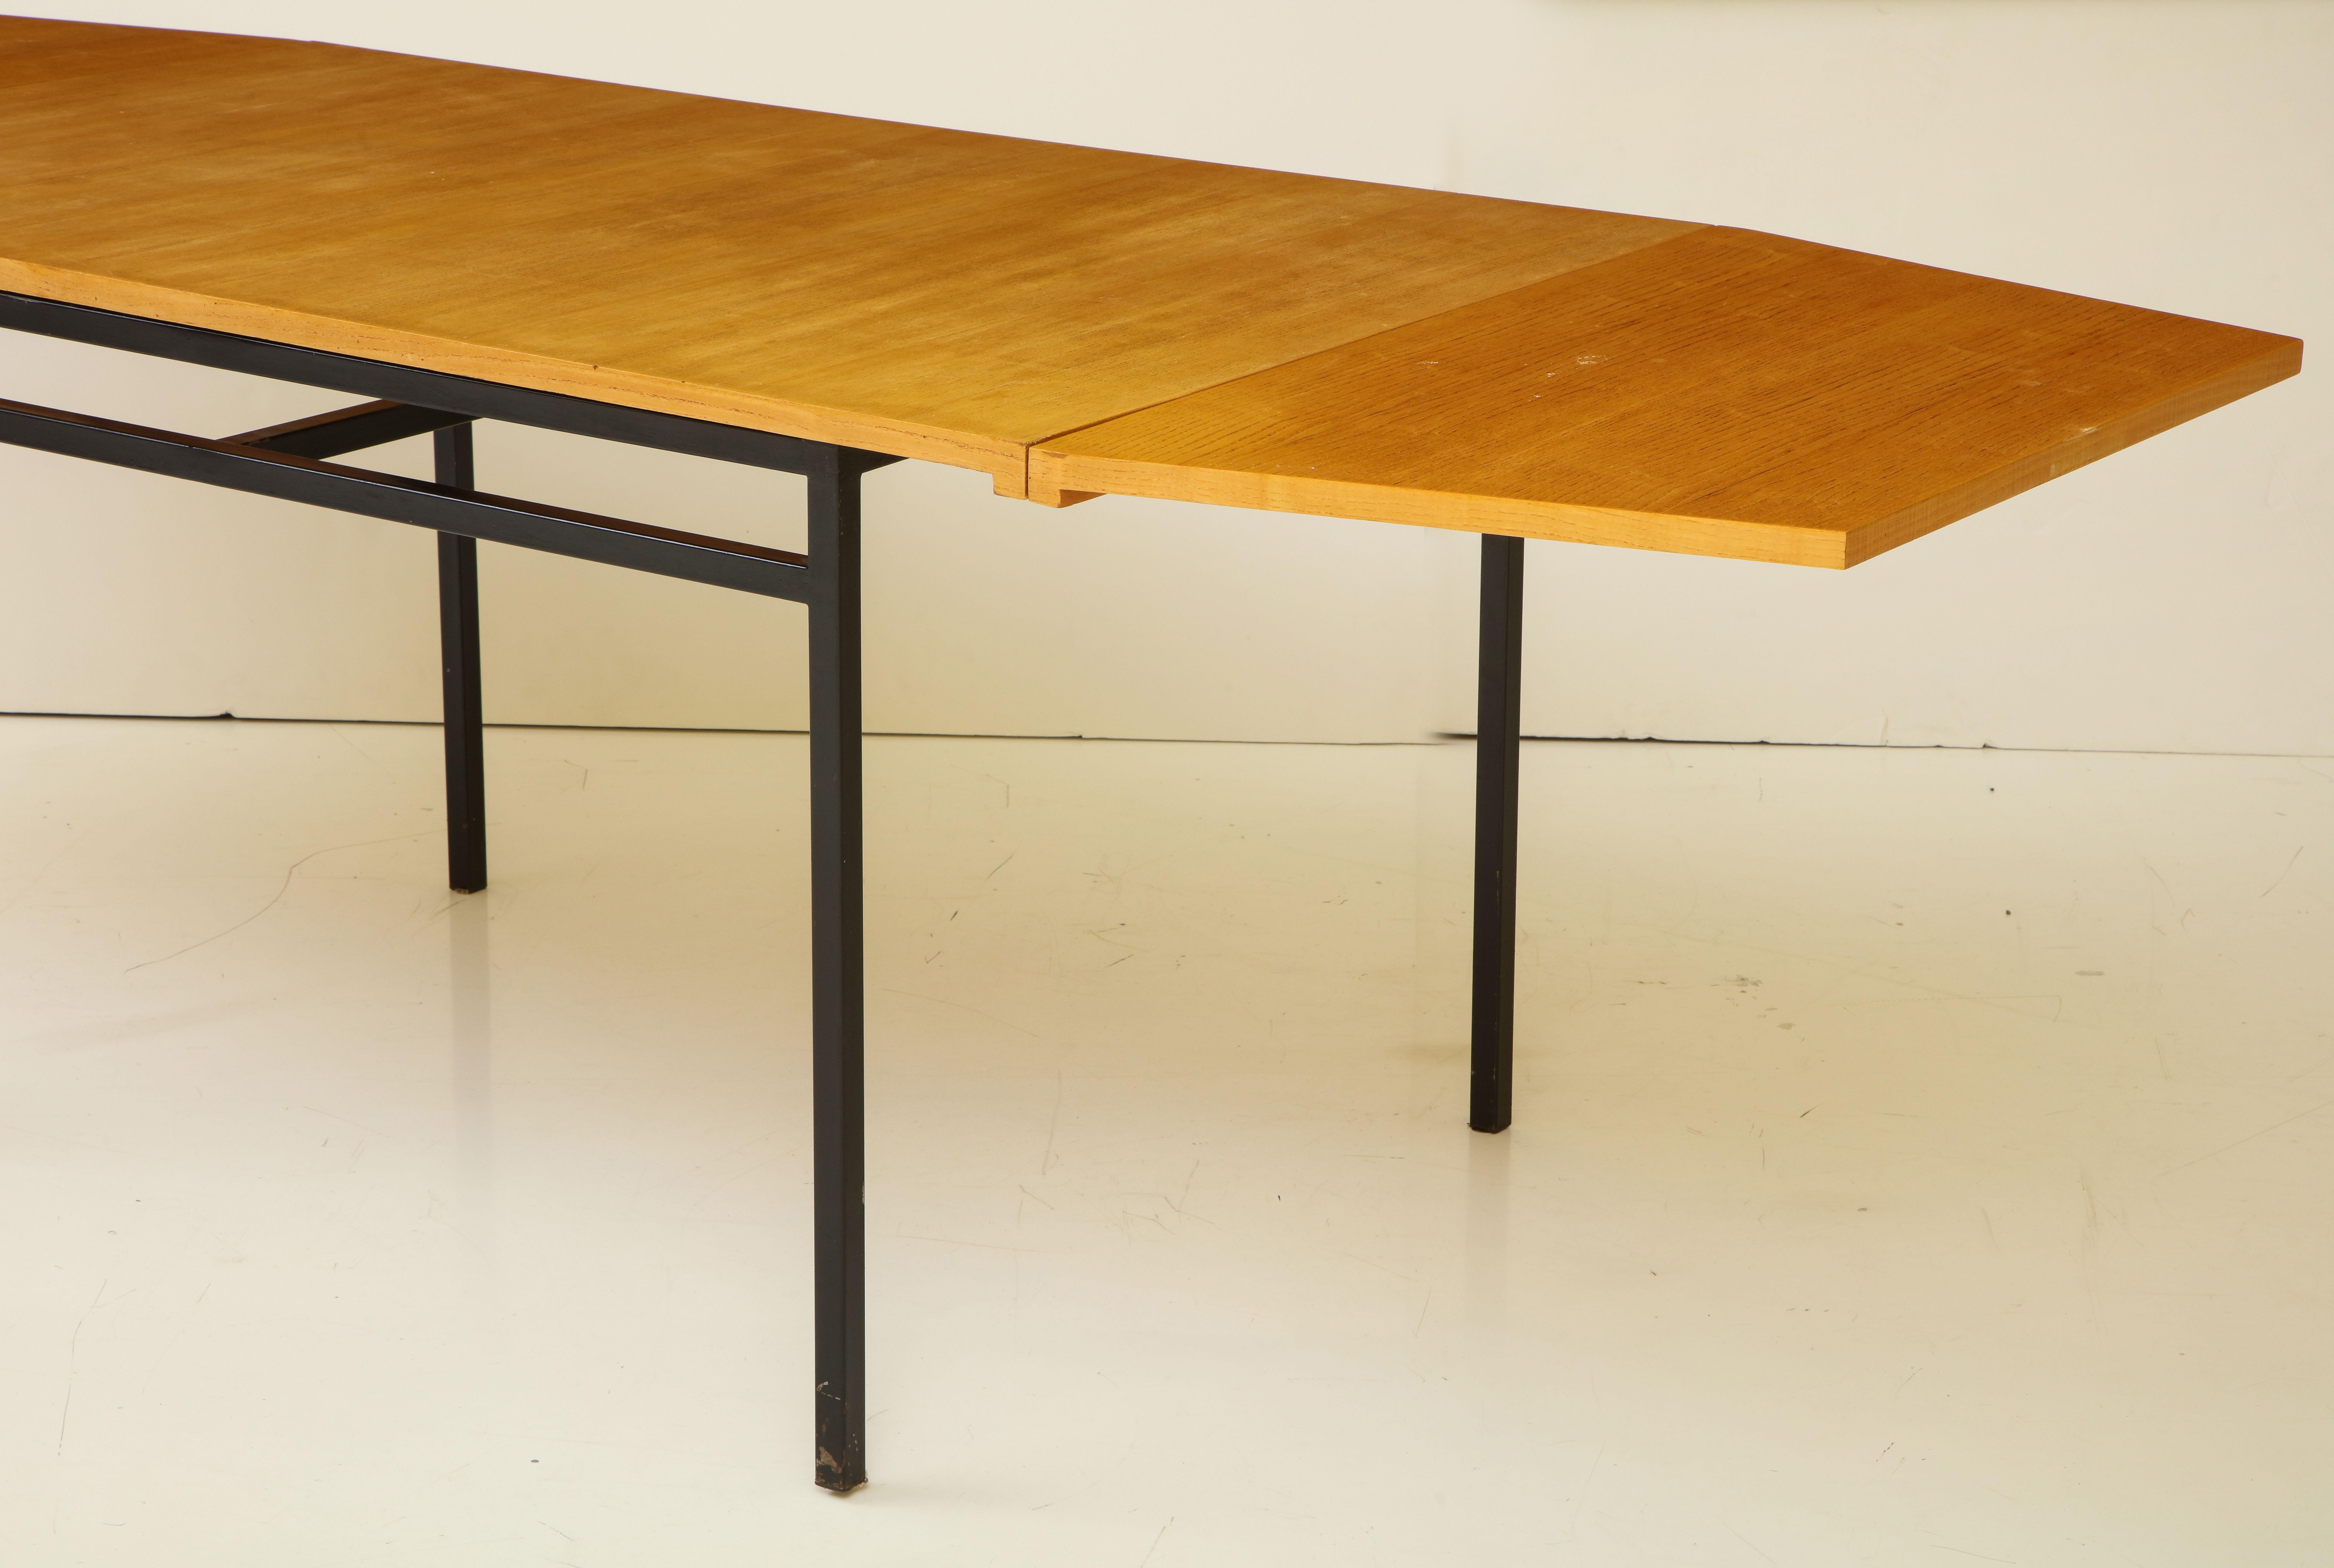 Rare Expandable Dining Room Table by Pierre Guariche and Arp, France, 1960s For Sale 3